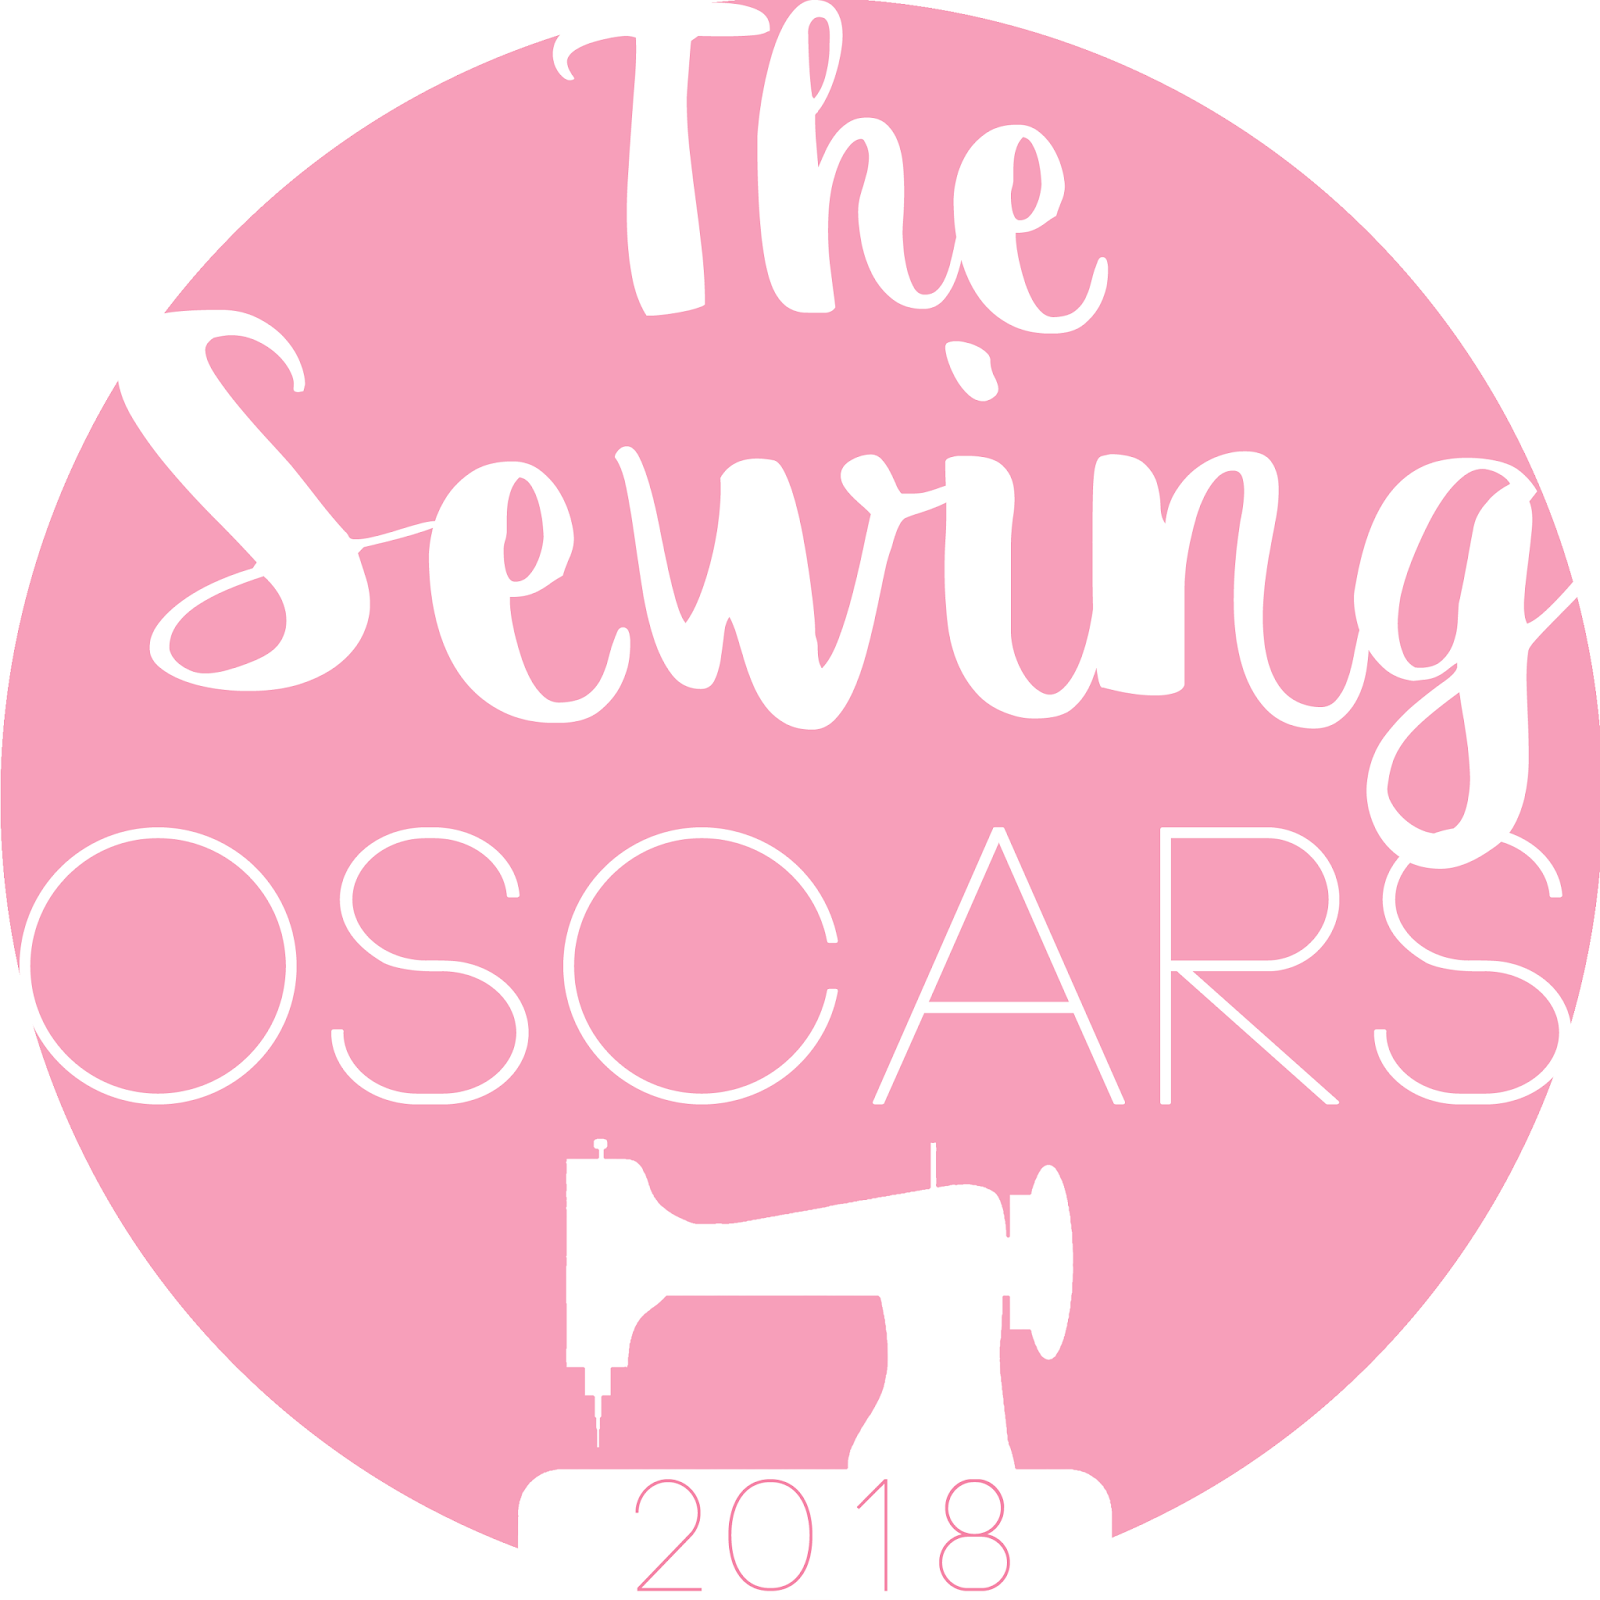 The Sewing Oscars 2018